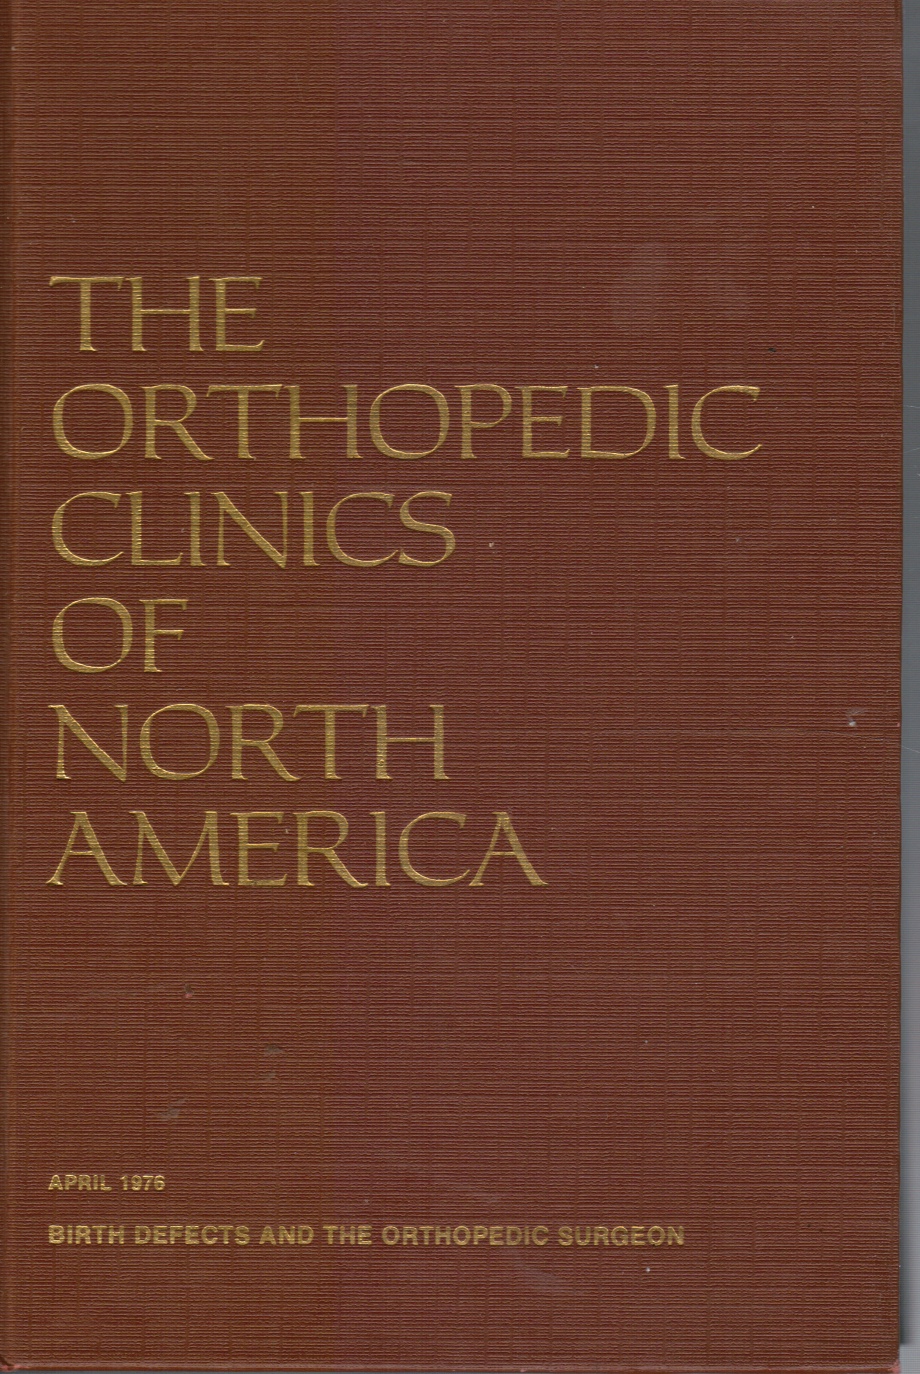 BANKS, HENRY H. (GUEST EDIOR) - Birth Defects and the Orthopedic Surgeon